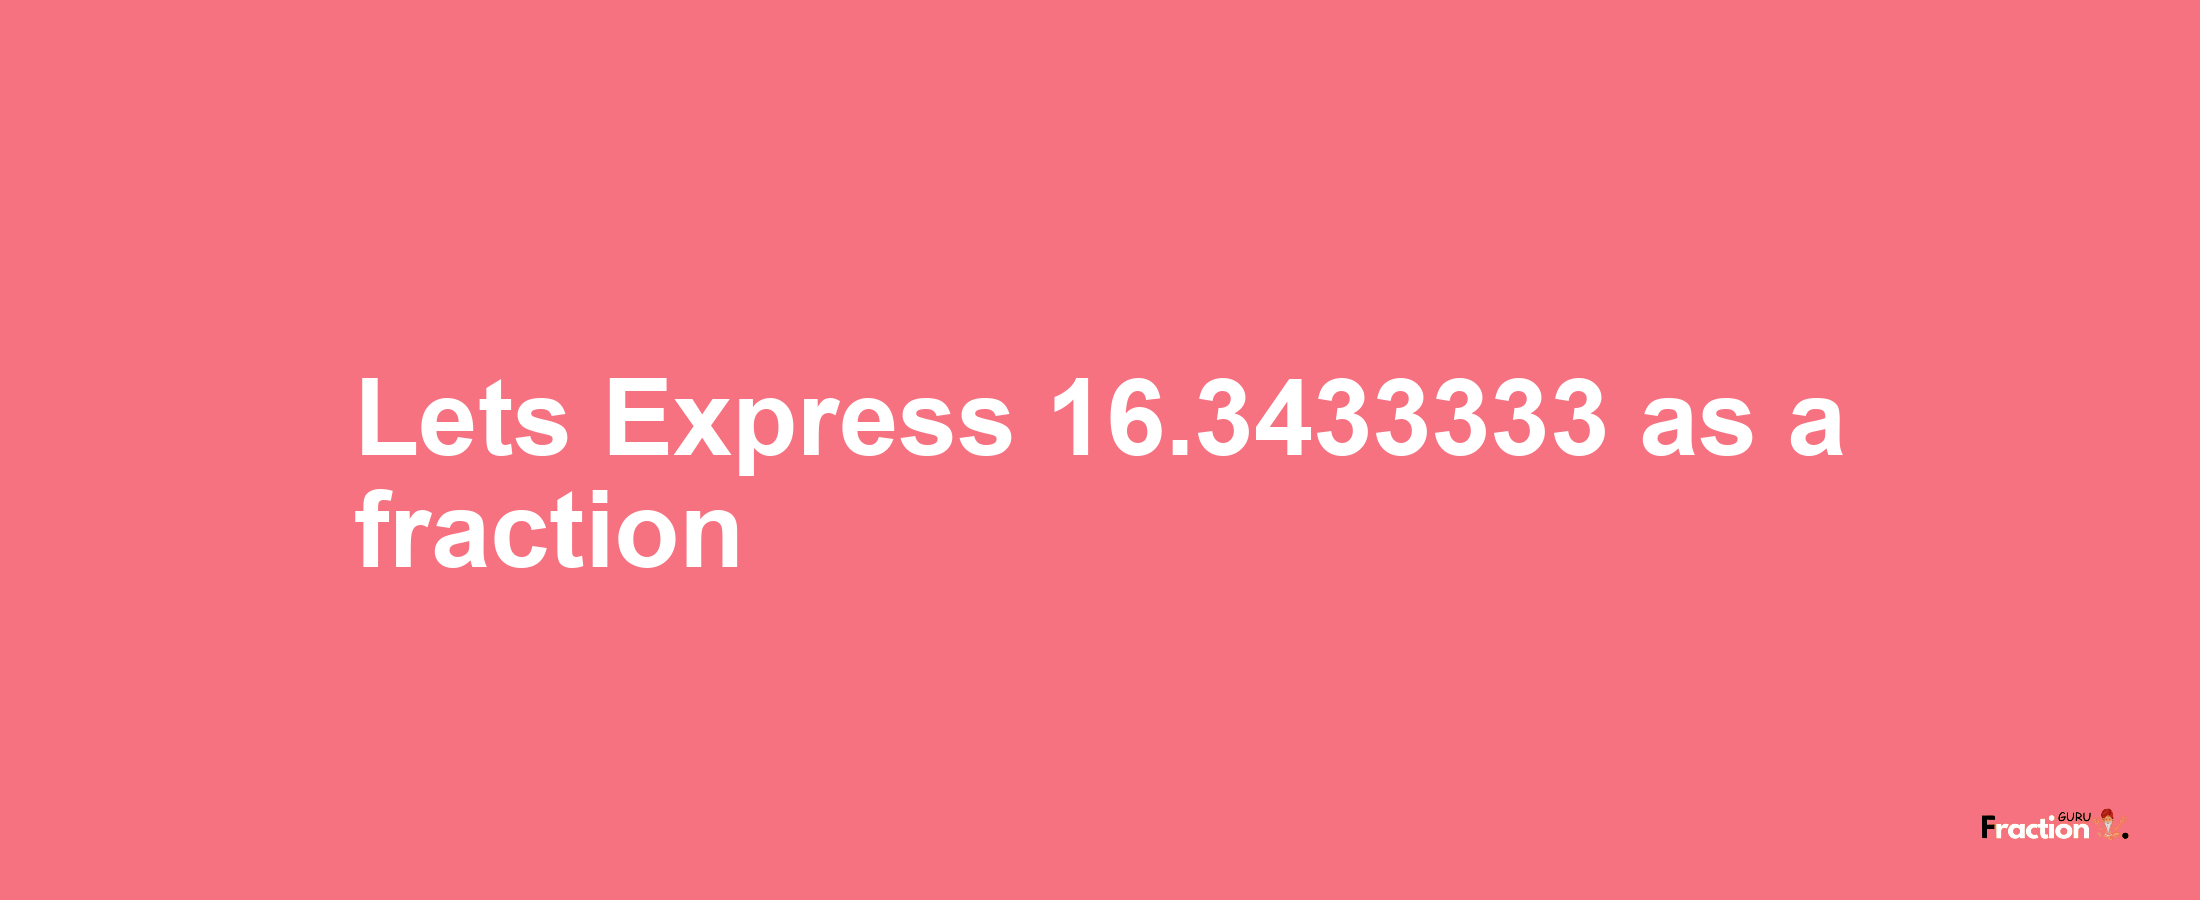 Lets Express 16.3433333 as afraction